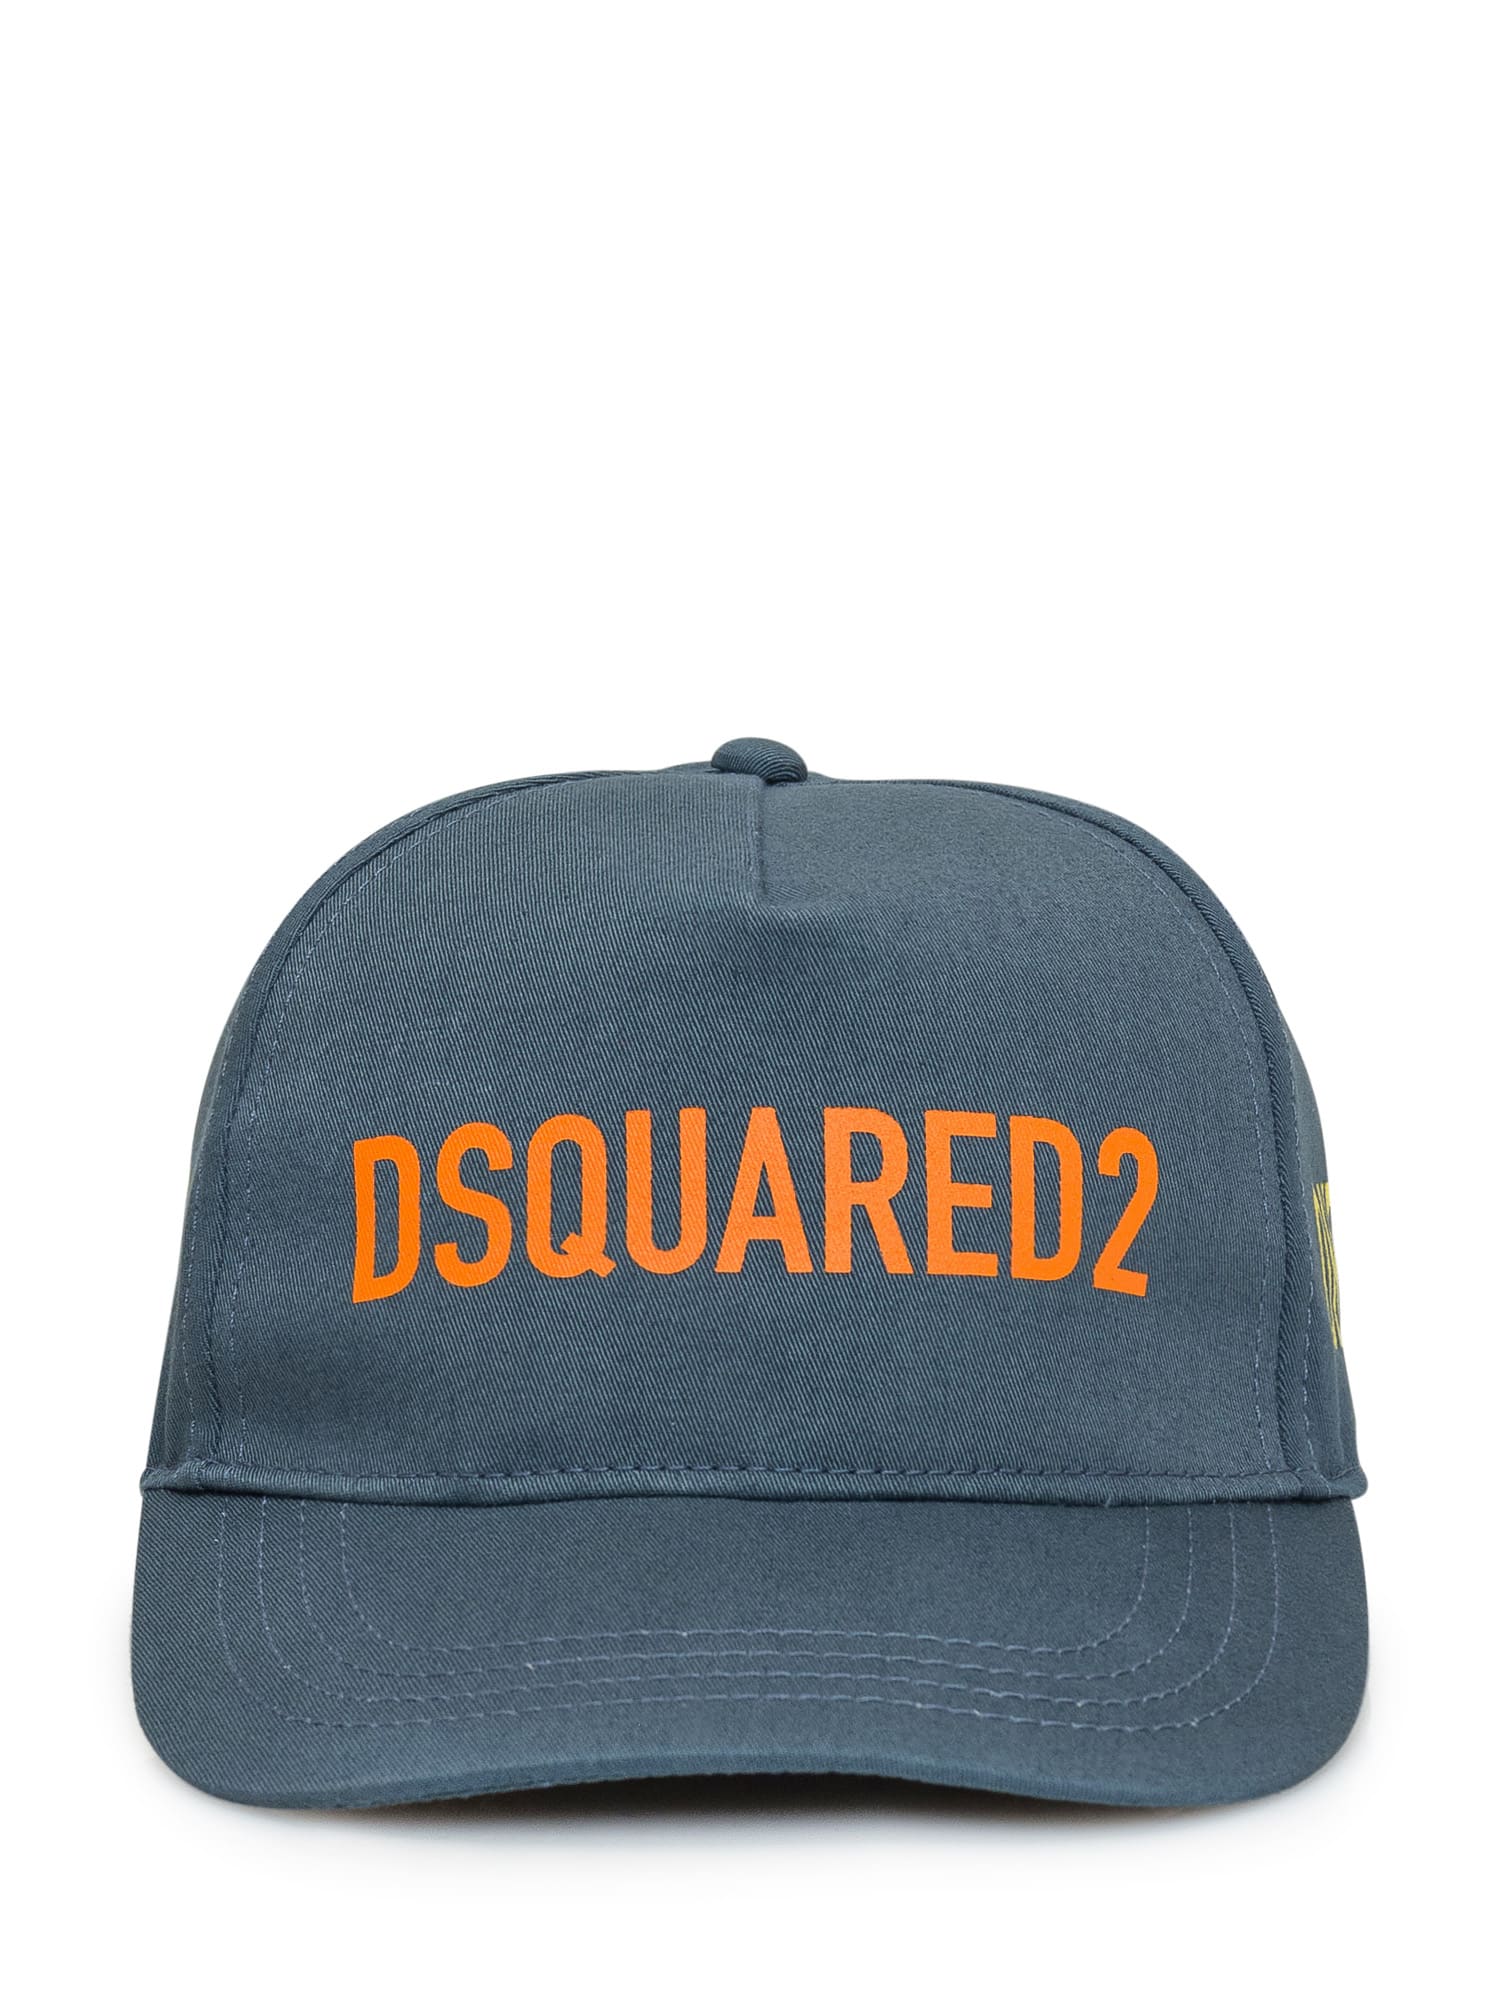 Dsquared2 One Life One Planet Baseball Hat - 0SEA PINE - female - Size: 0one size